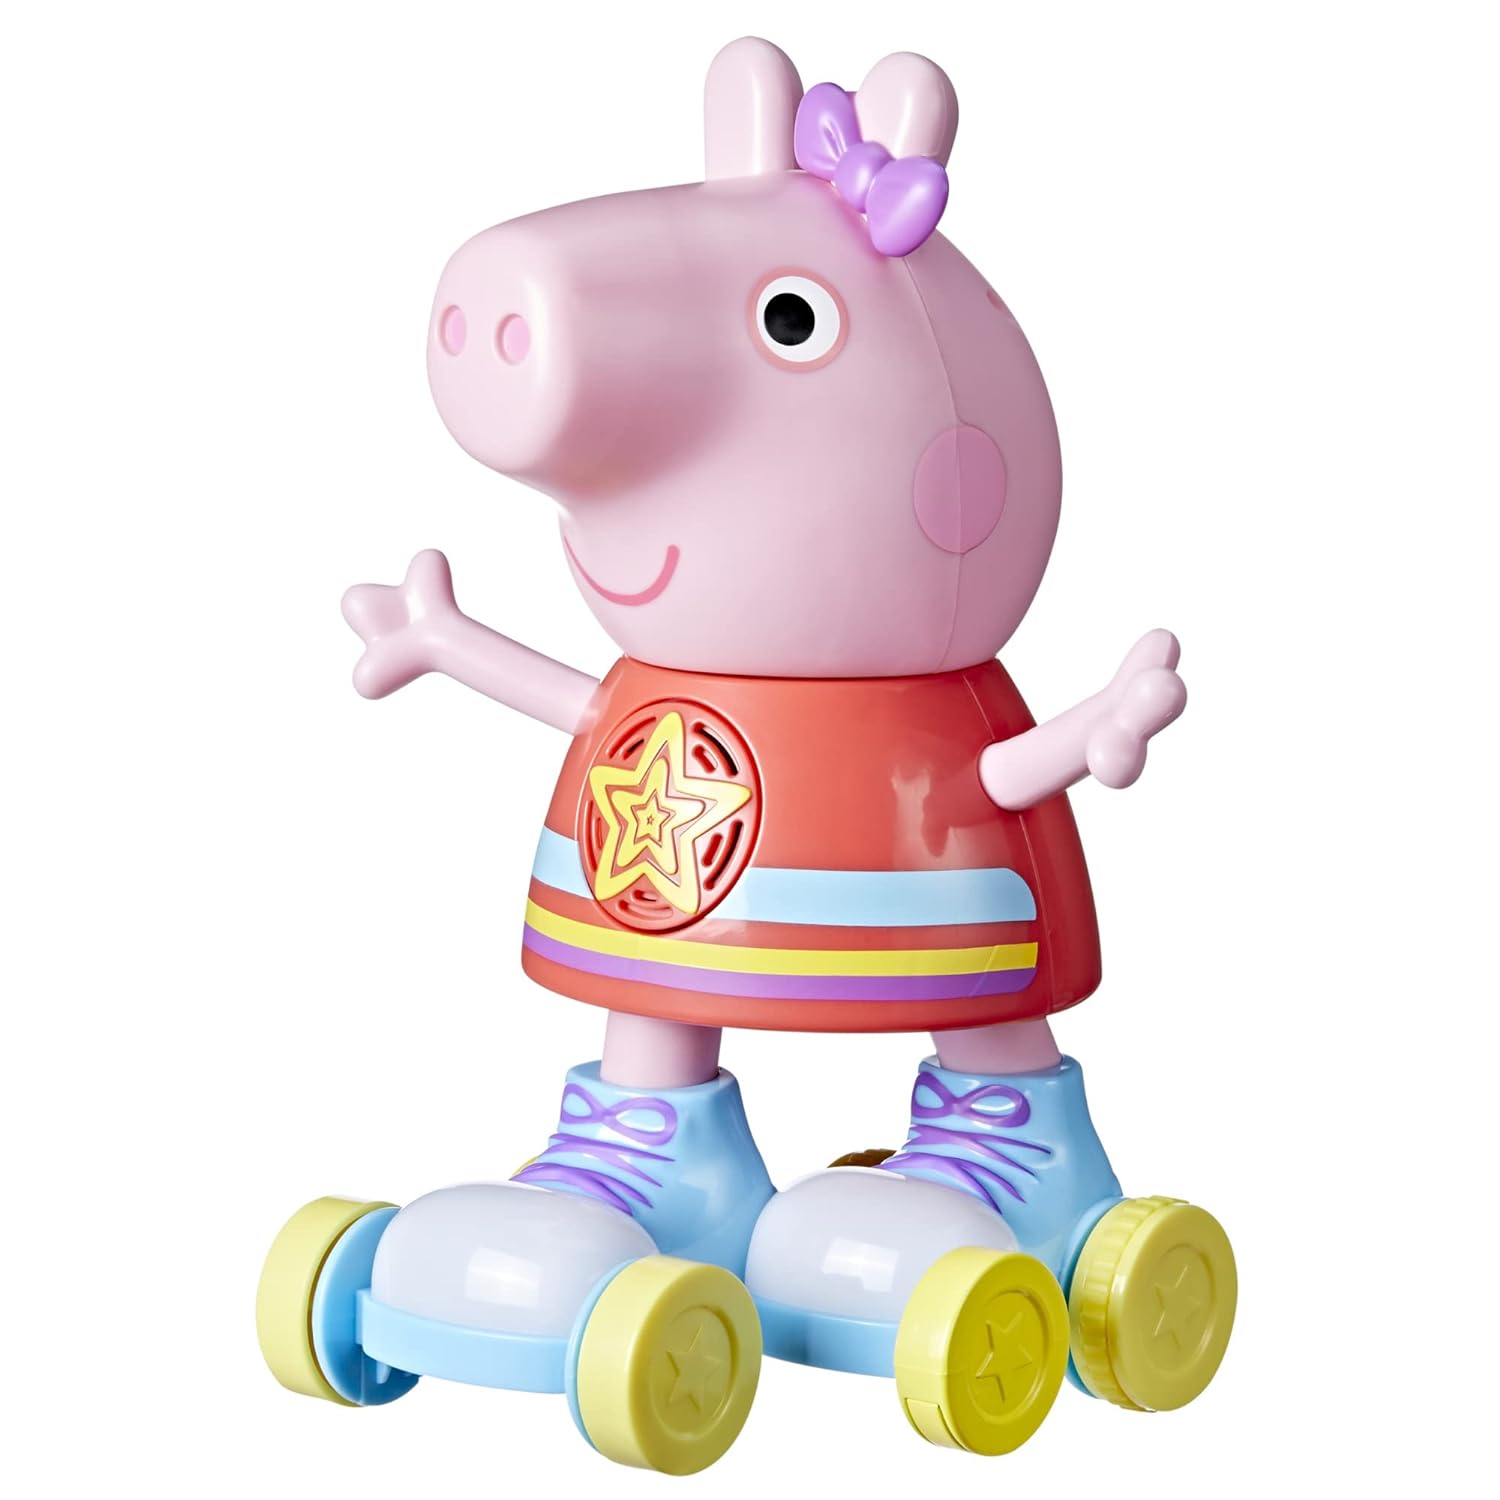 Hasbro Peppa Pig Roller Disco Peppa Roller Skating Doll, Pull-and-Go Action, 11 Inch Figures, Preschool Toys for 3 Year Old Girls …